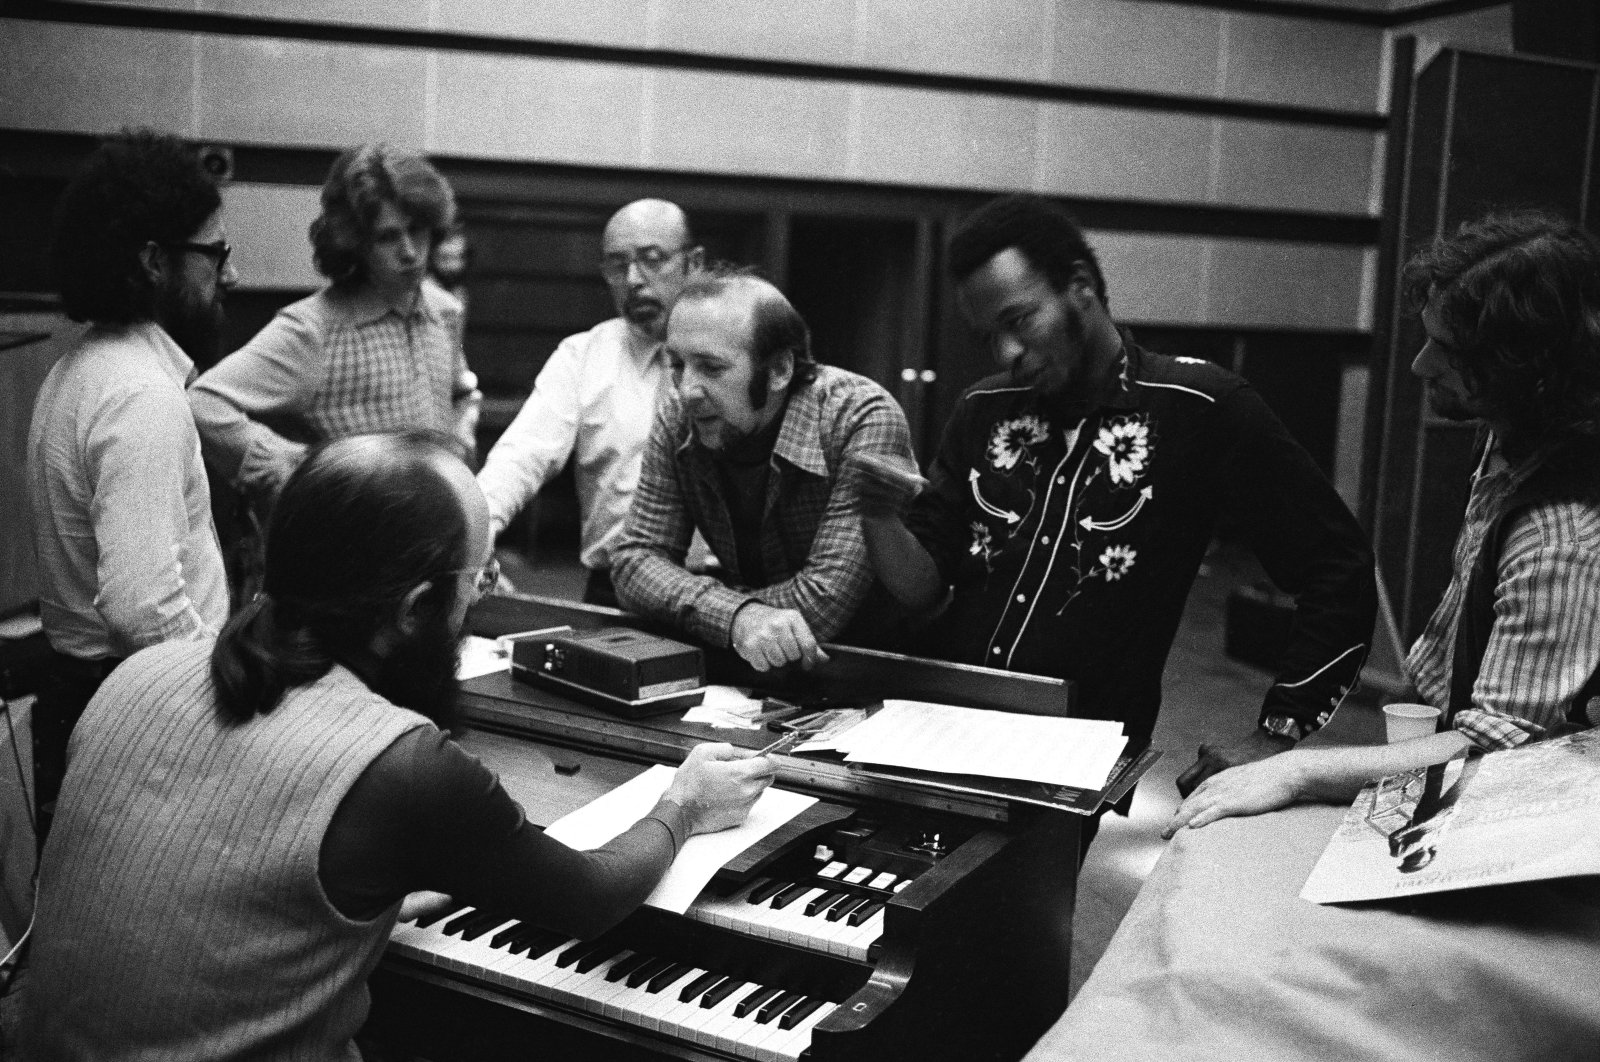 American jazz musician Herbie Mann (1930-2003) leans on a piano (C) at a recording studio with Mick Taylor, Ahmet Ertegün and Albert Lee, among others, 1973. (Getty Images Photo)